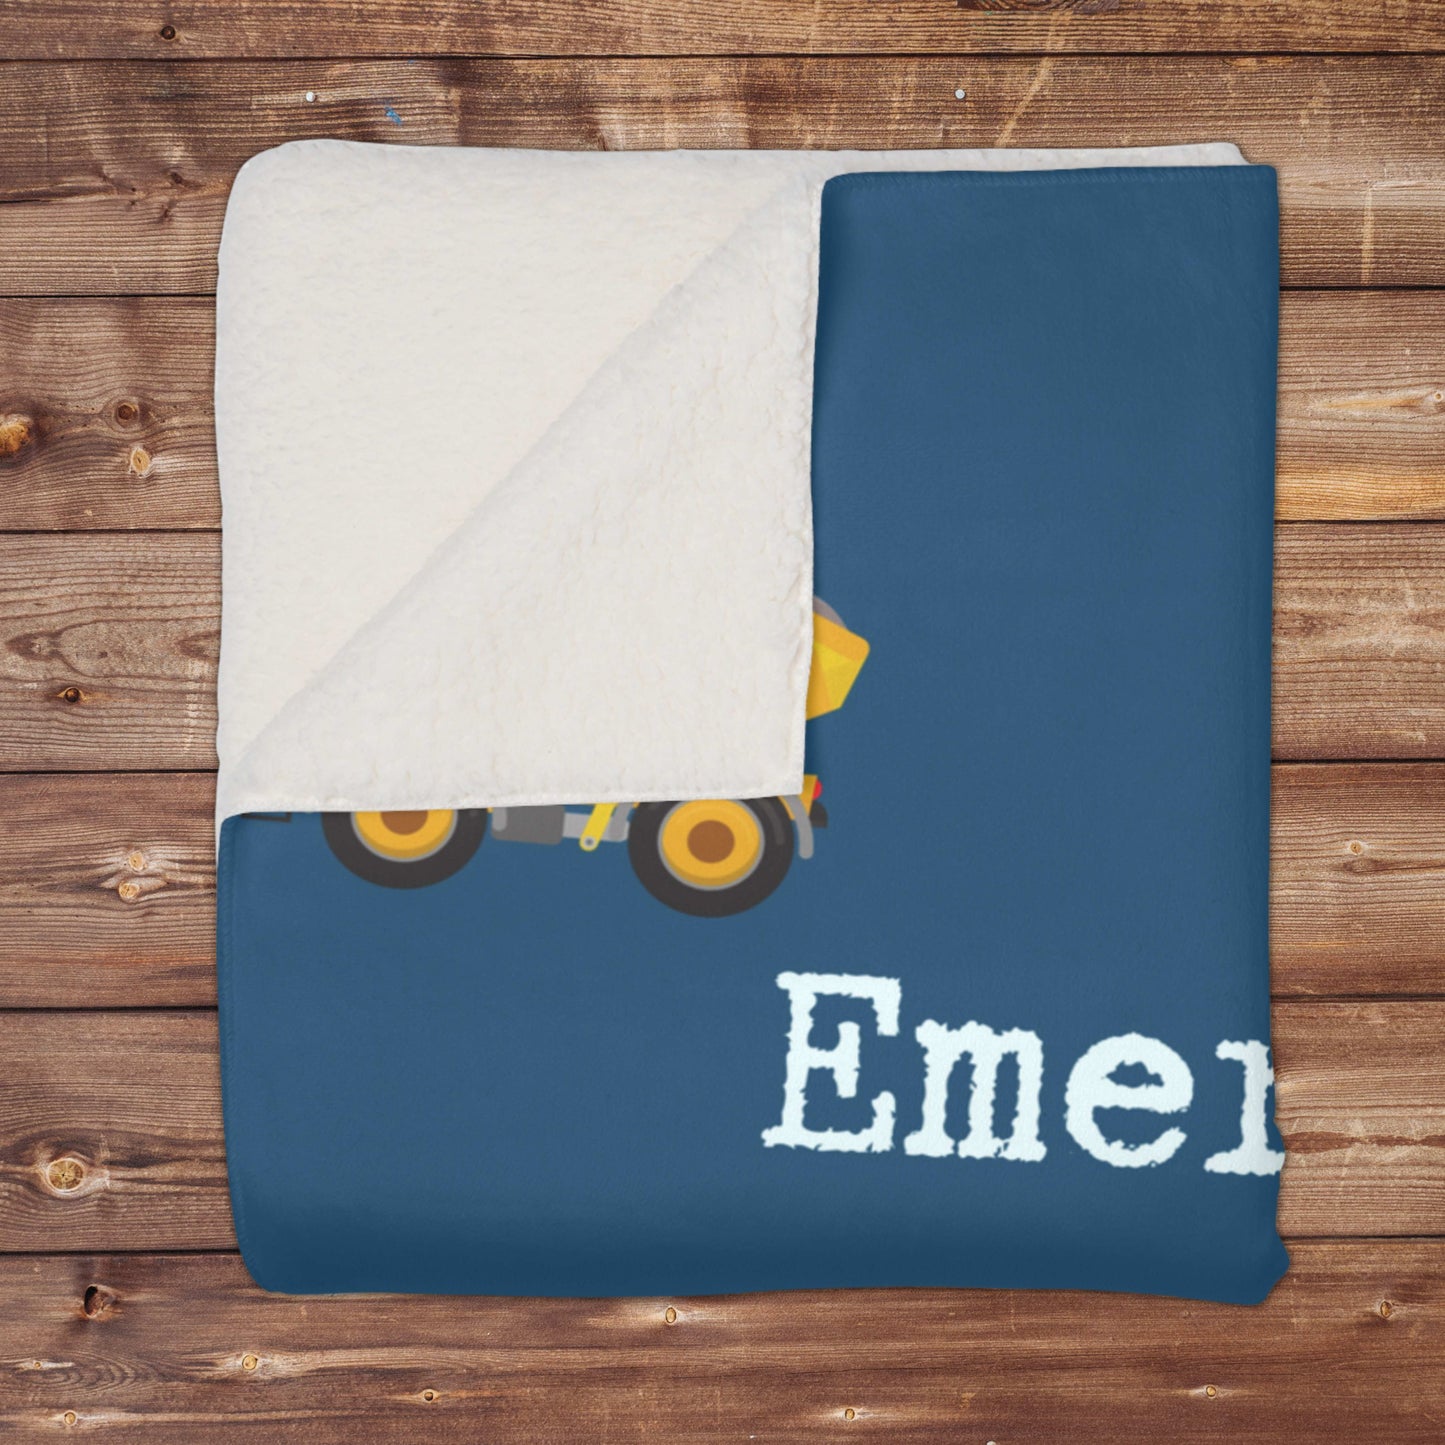 Personalized Name Construction Blanket